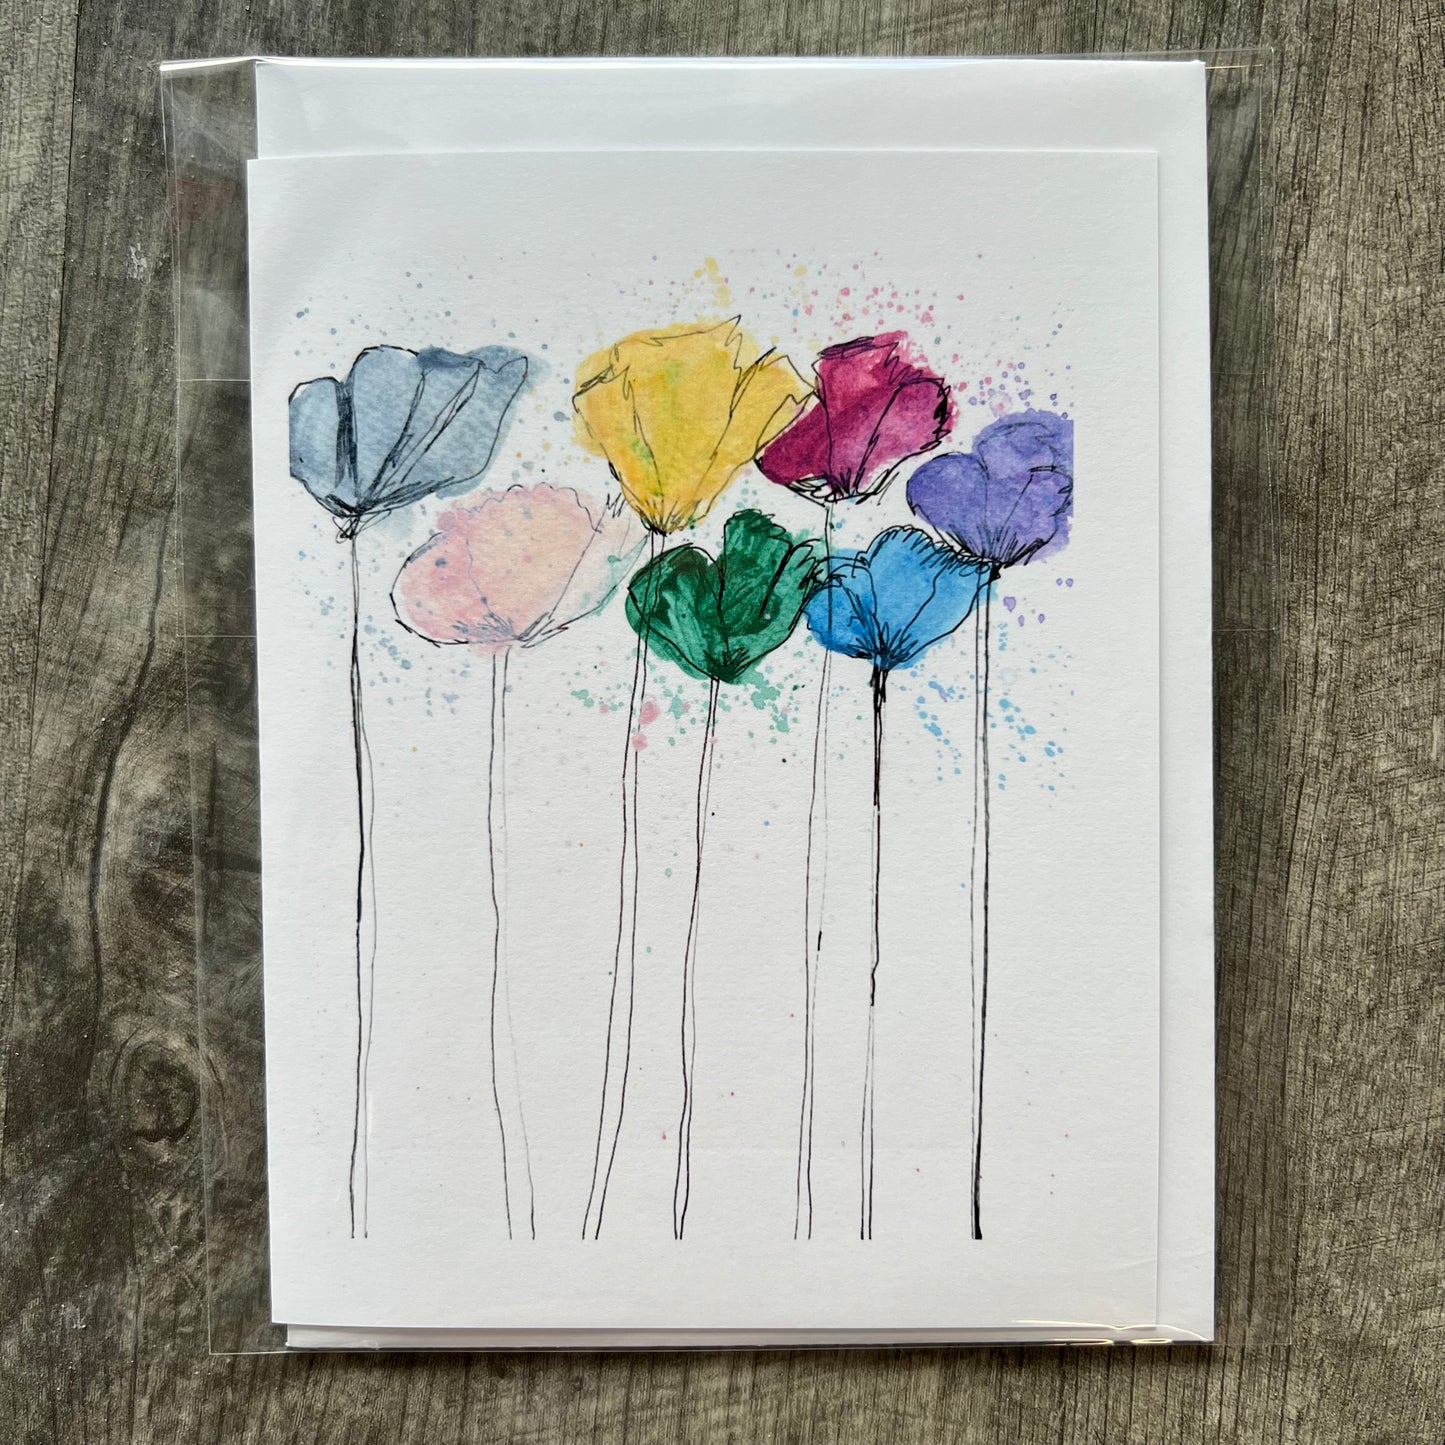 7 Flowers - Greeting card in size 6.5x10” with mat finish